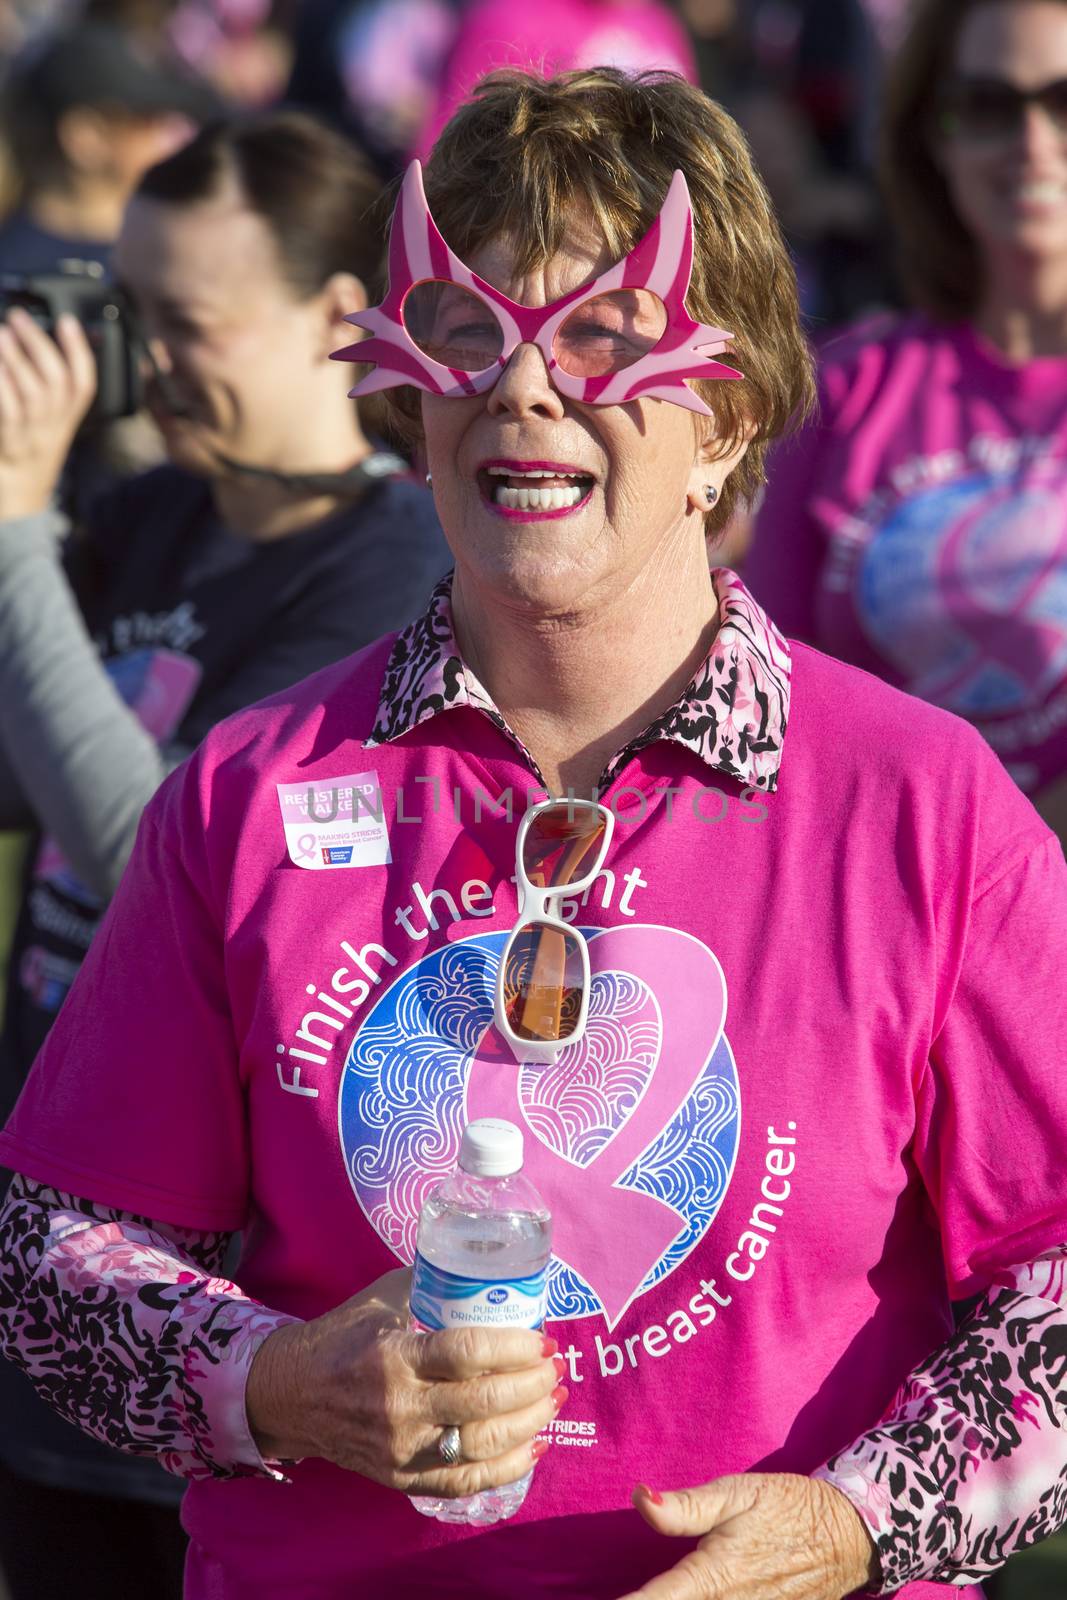 TUCSON, PIMA COUNTY, ARIZONA, USA - OCTOBER 18:  Unidentified woman in the audience before the 2015 American Cancer Society Making Strides Against Breast Cancer walk, on October 18, 2015 in Tucson, Arizona, USA.